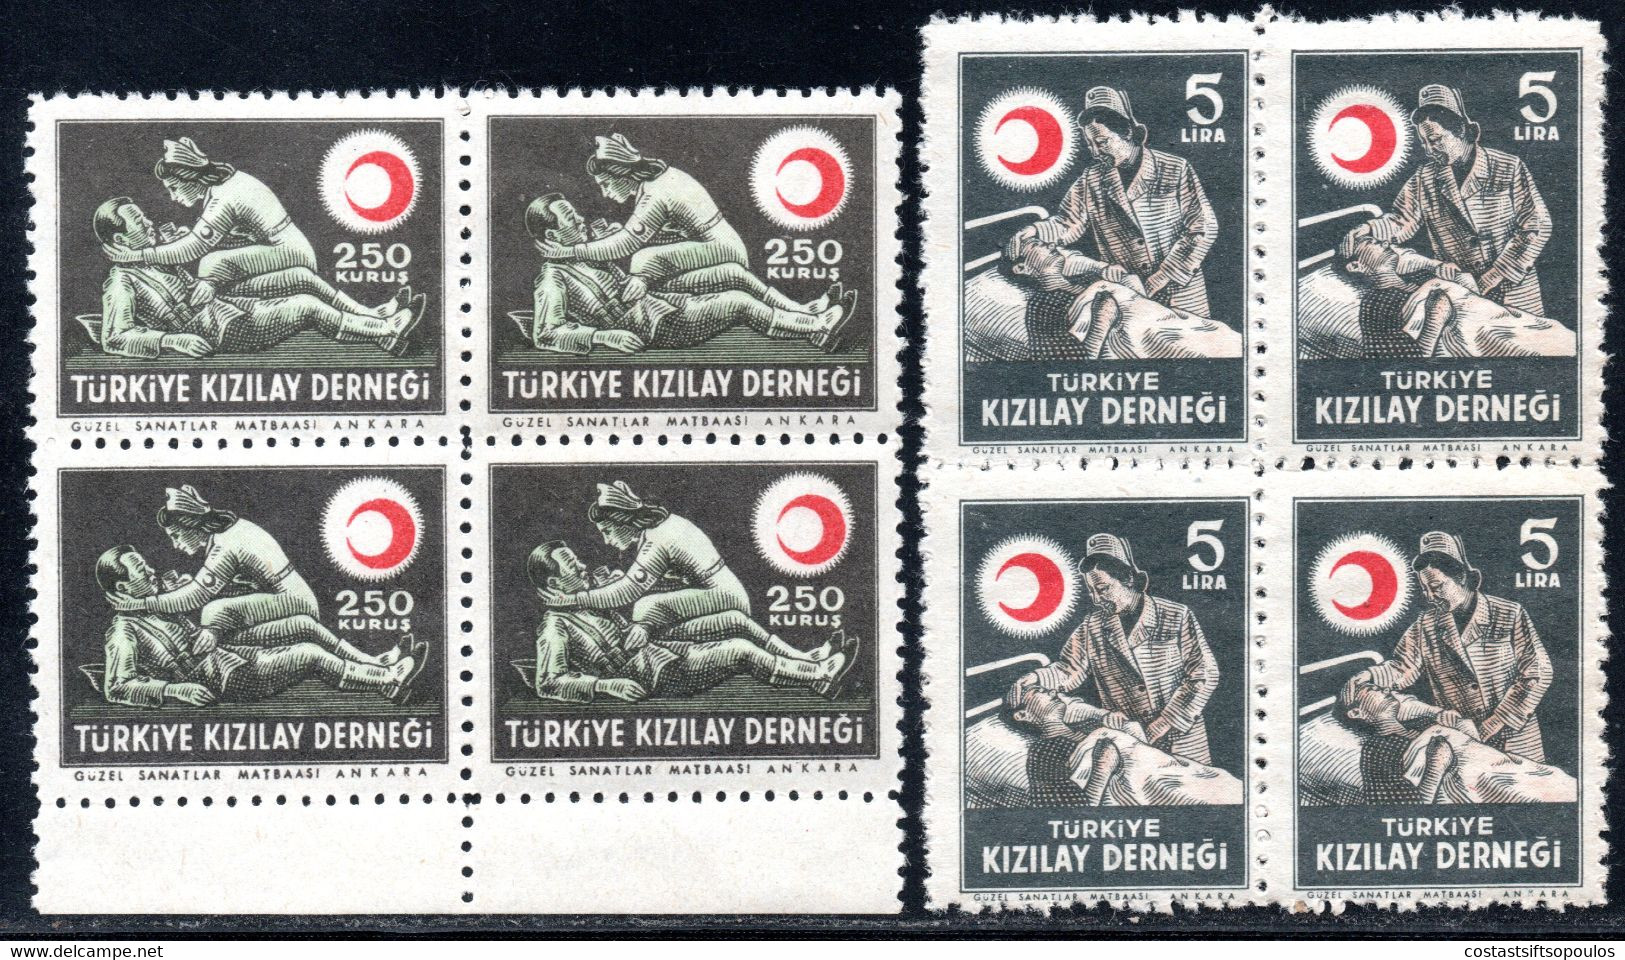 1020.TURKEY,1947. CHARITY RED CRESCENT,MICH. 134-135 MNH BLOCKS OF 4,BICOLORED GUM. - Neufs